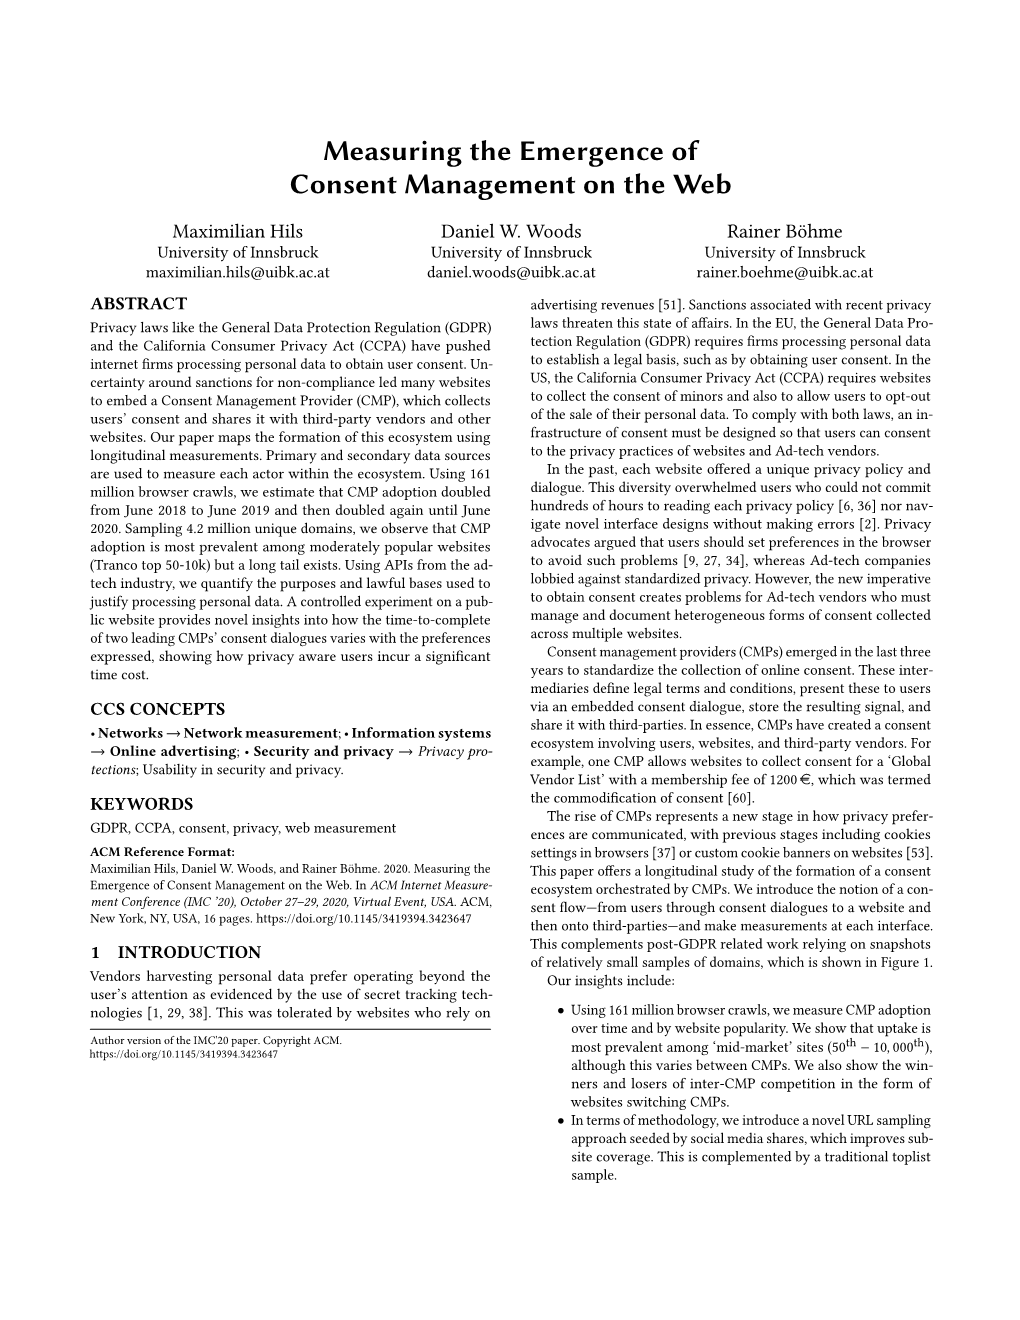 Measuring the Emergence of Consent Management on the Web